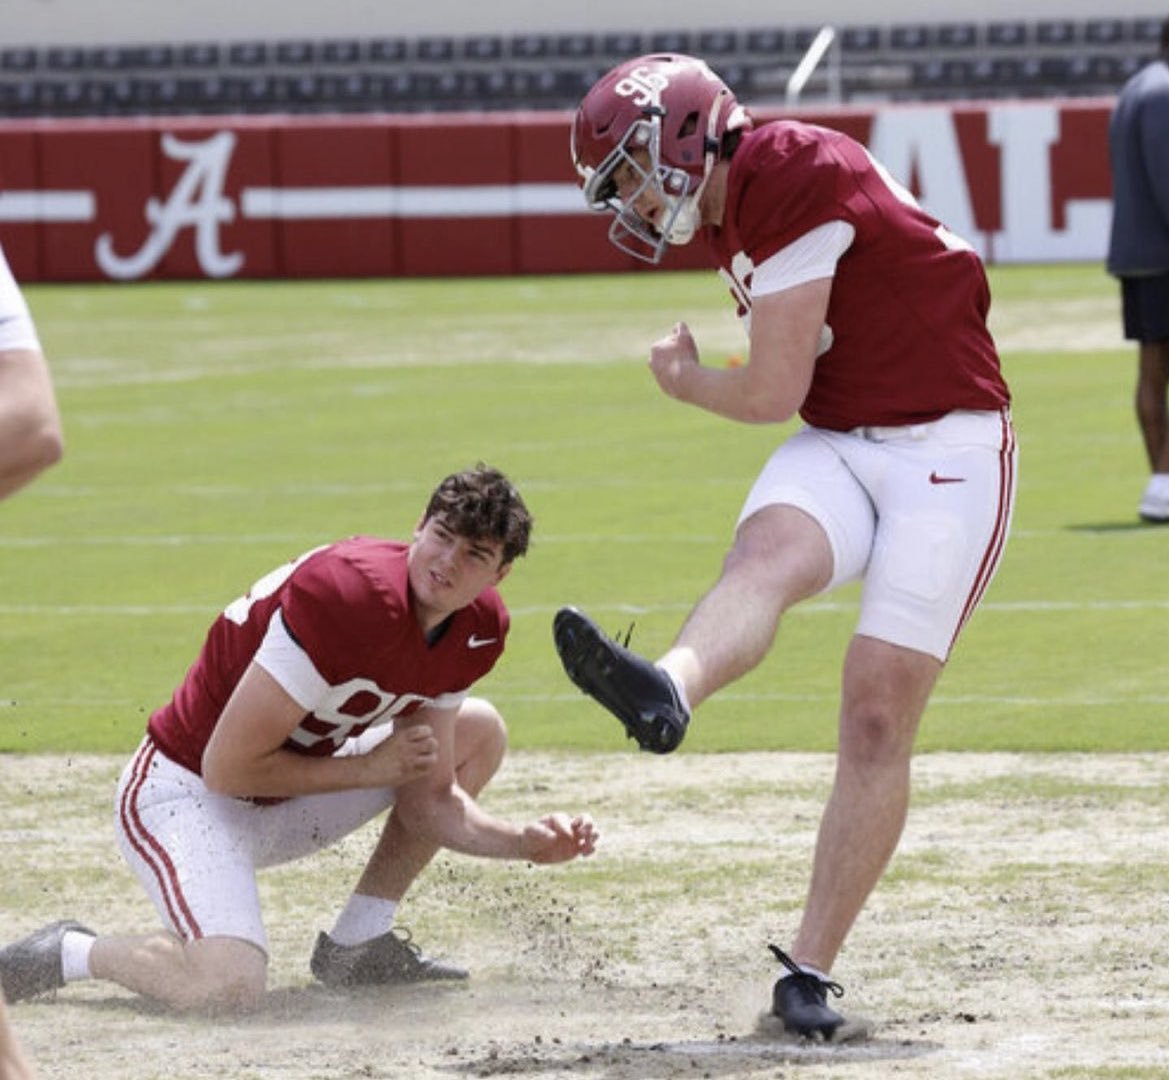 Alabama place kicker Reed Harradine has committed to Grambling State, his NIL agents at @APSportsAgency tell @On3sports. on3.com/transfer-porta…